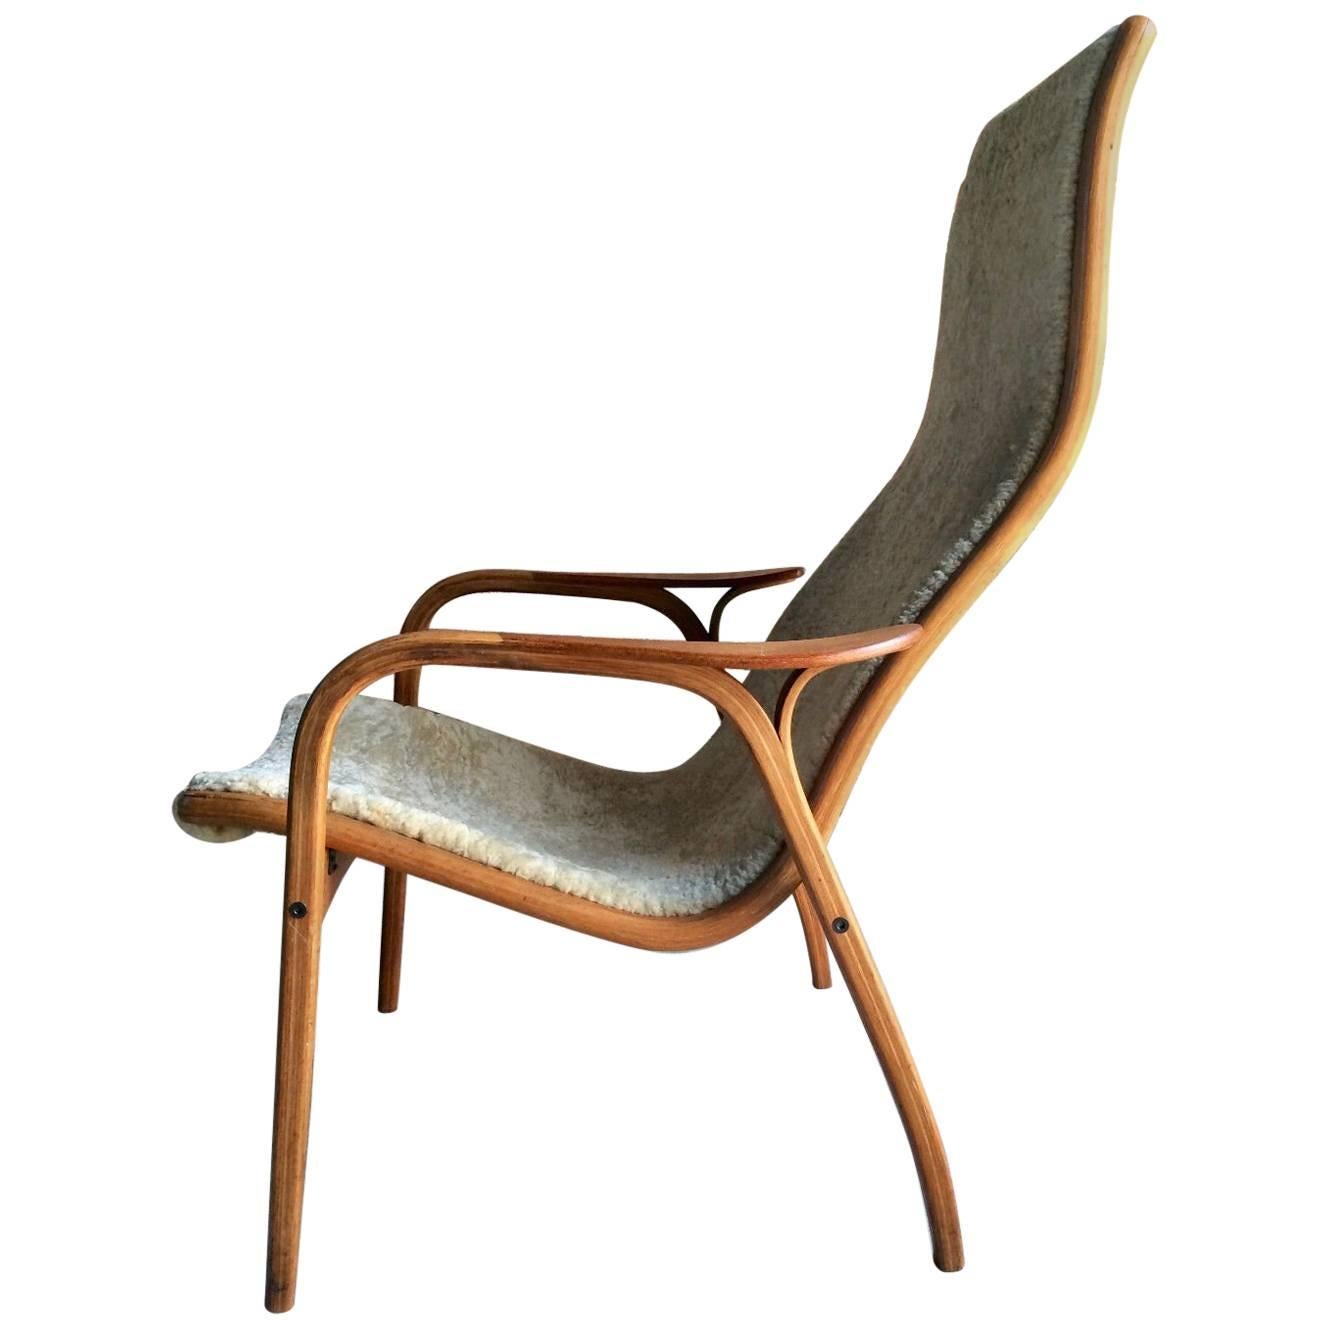 Midcentury 'Lamino' Lounge Chair by Yngve Ekstrom by Swedese, Sweden, 1960s